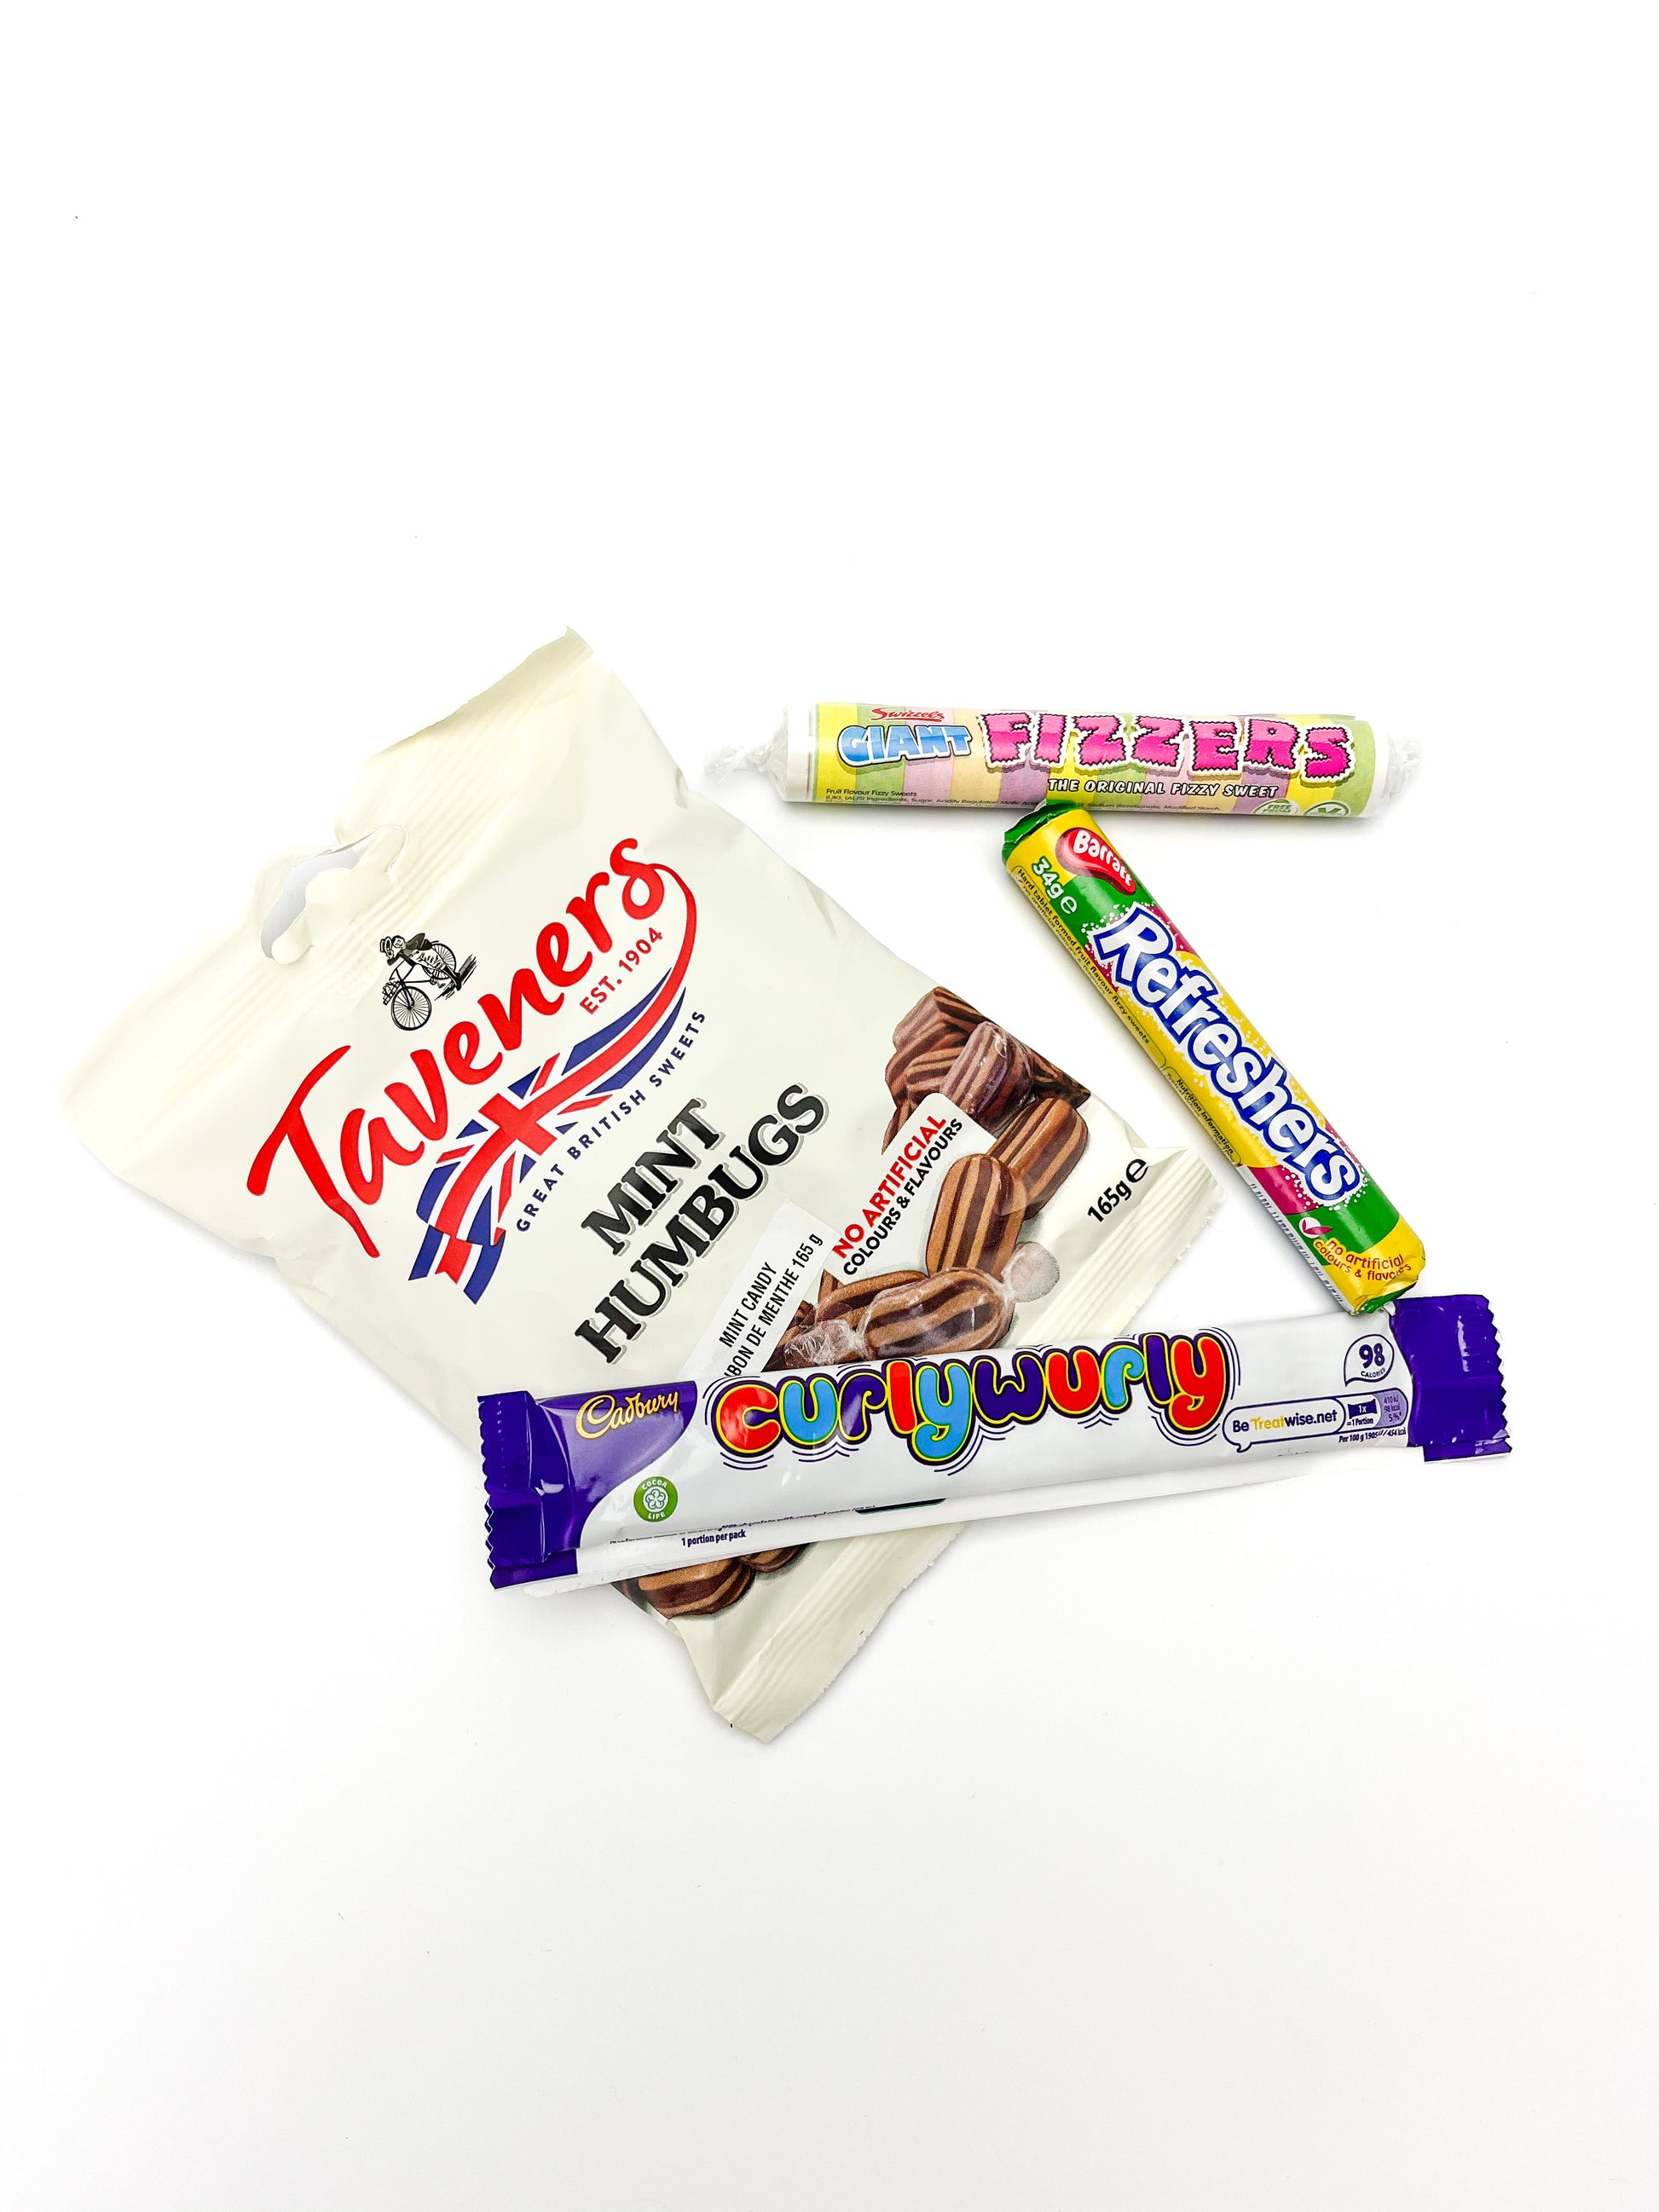 A package of taveners mint humbugs, barret refreshers, giant fizzers, and a curlywurly bar displayed on a white background.